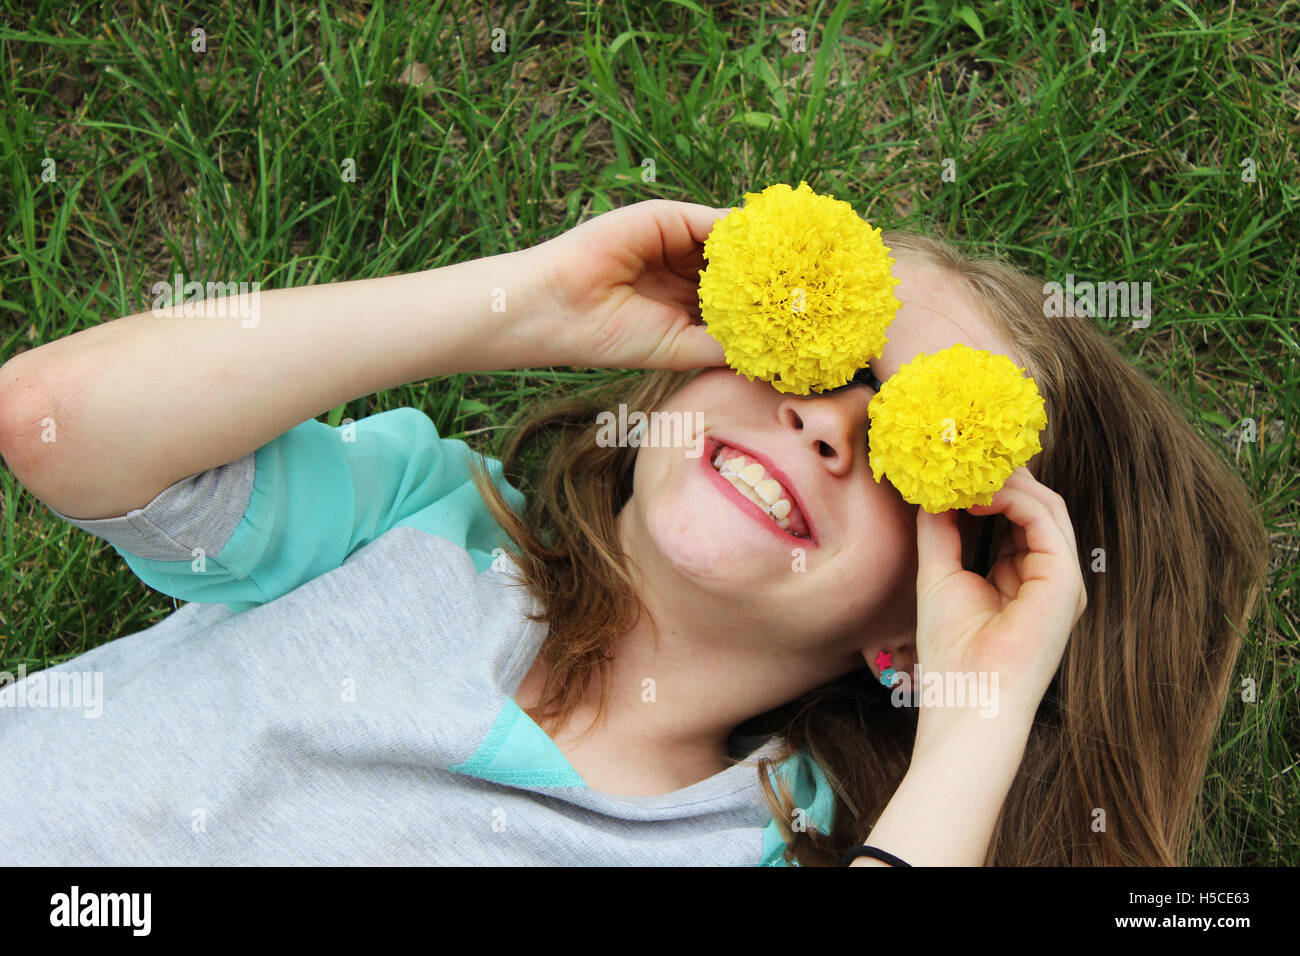 young girl laying in green grass playing with flowers over her eyes and smiling Stock Photo